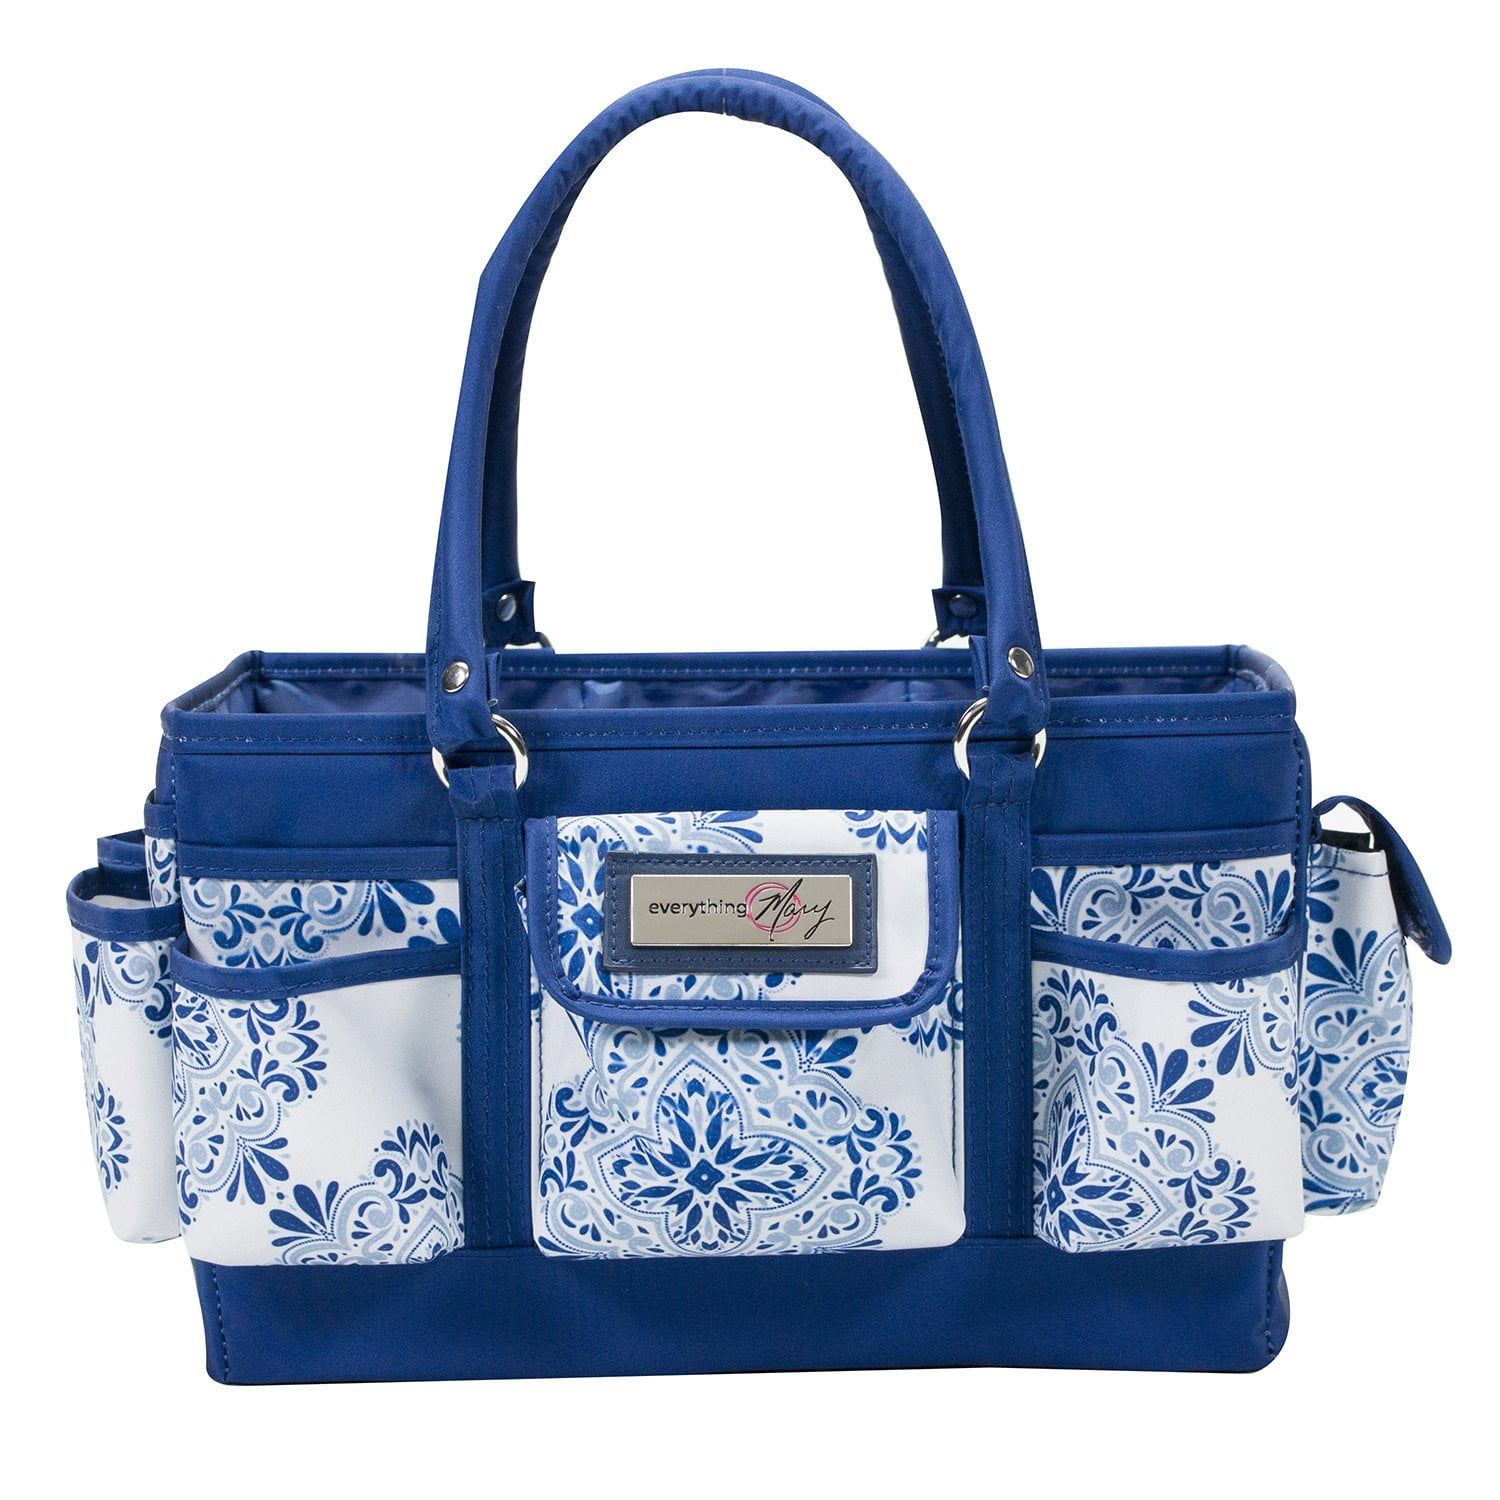 Everything Mary Blue Deluxe Store and Tote - Storage Craft Bag Organizer for Crafts, Sewing ...